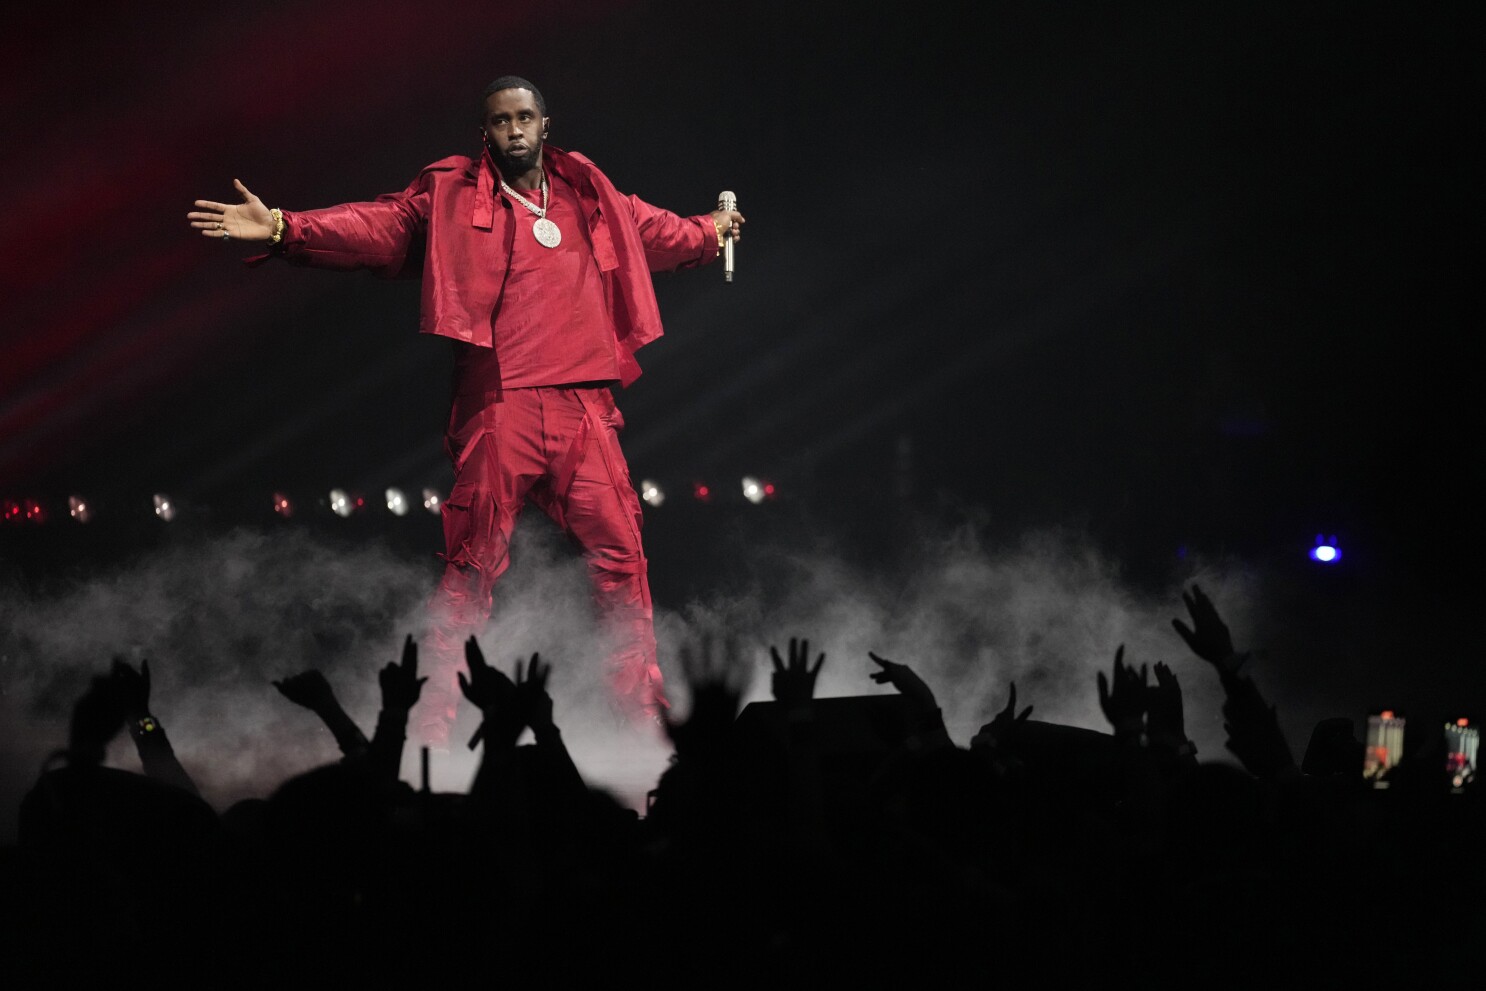 Sean Combs discography - Wikipedia